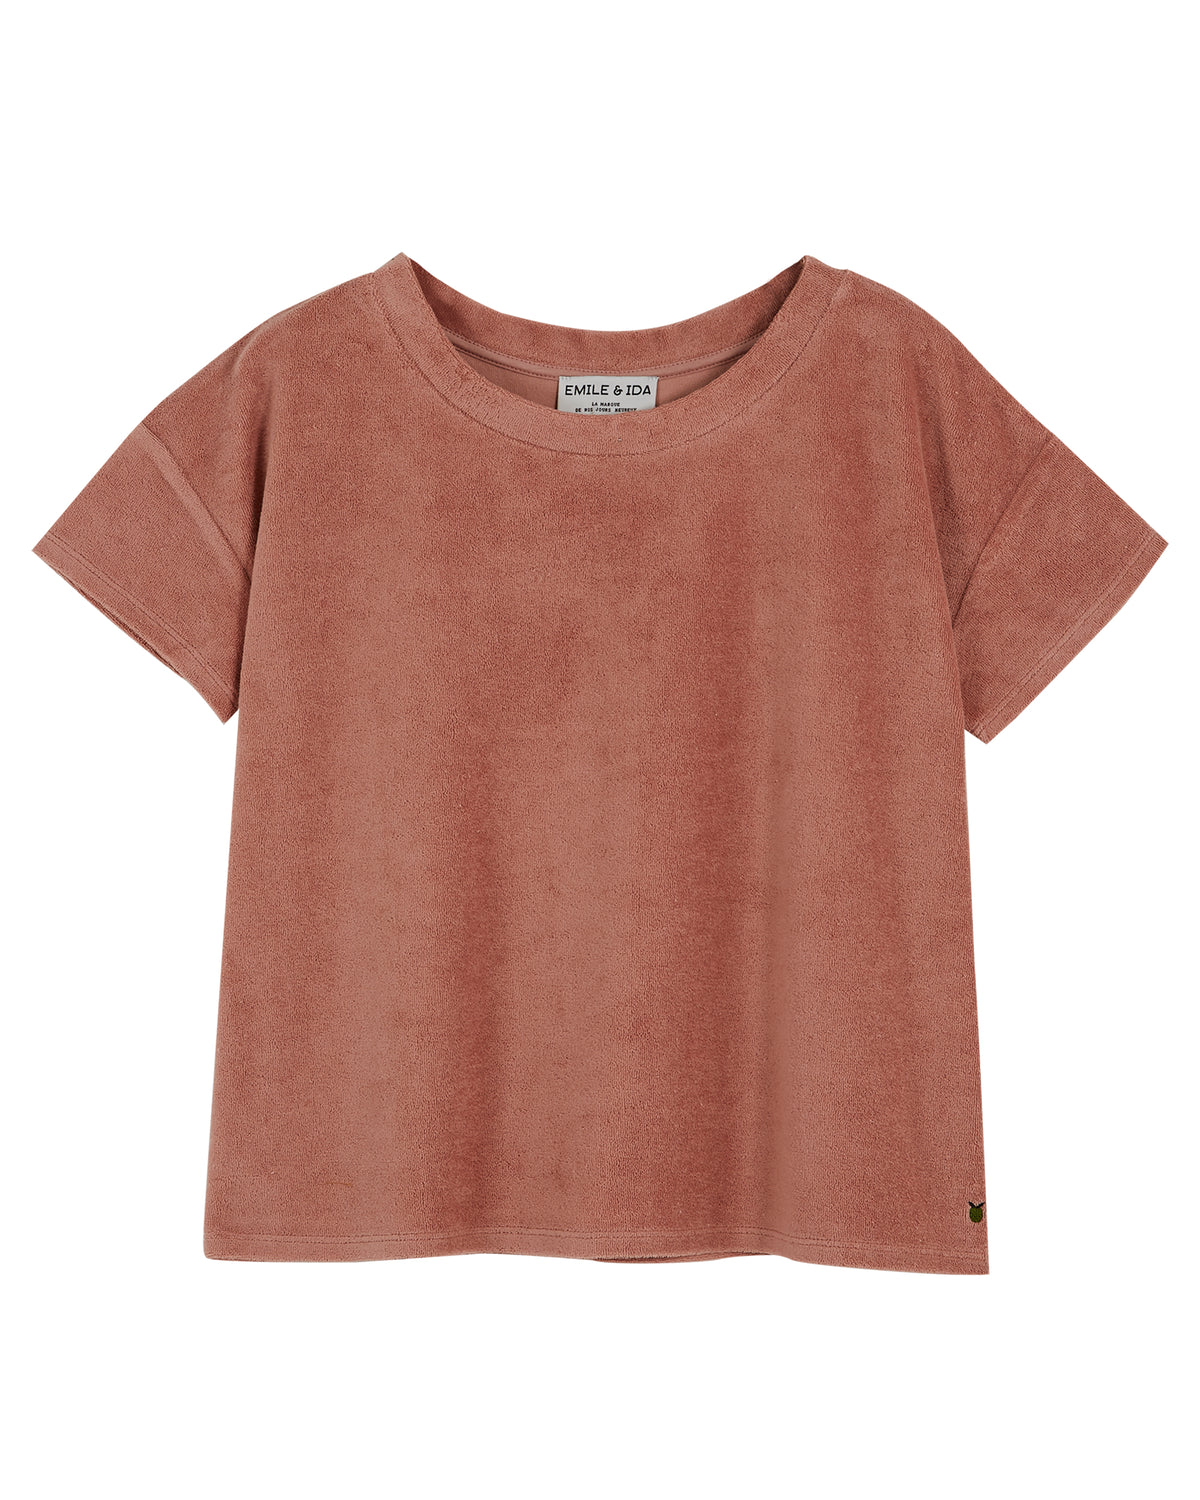 Blush terry jersey short sleeved tee with scoop neckline